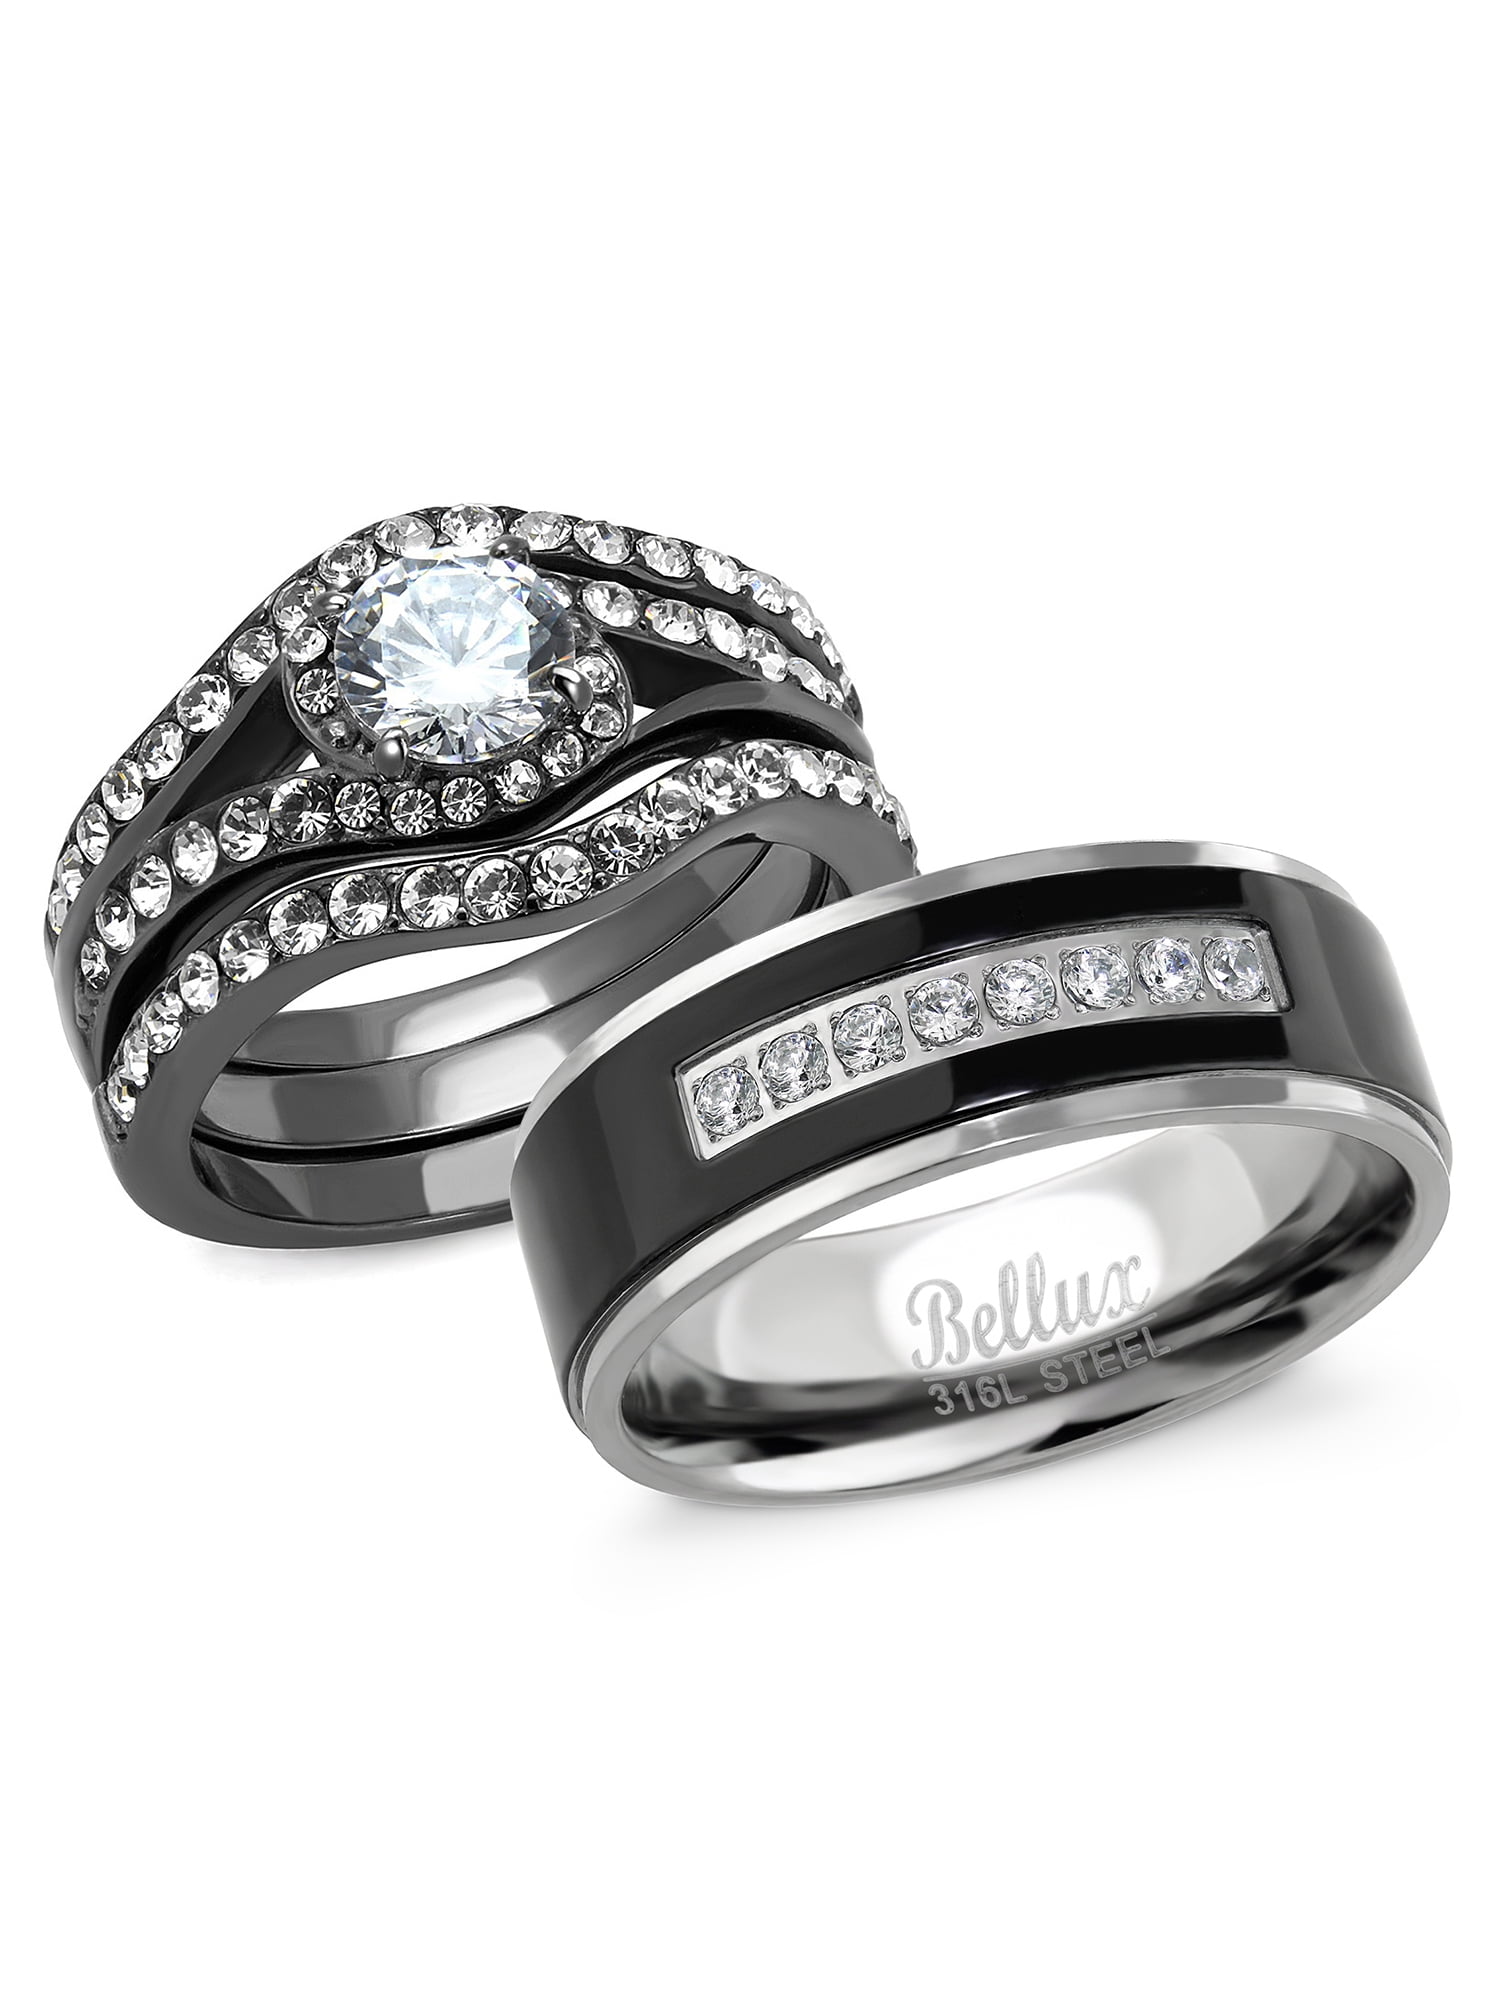 Bellux Style Couples Wedding Rings  Set for Him and Her 1 